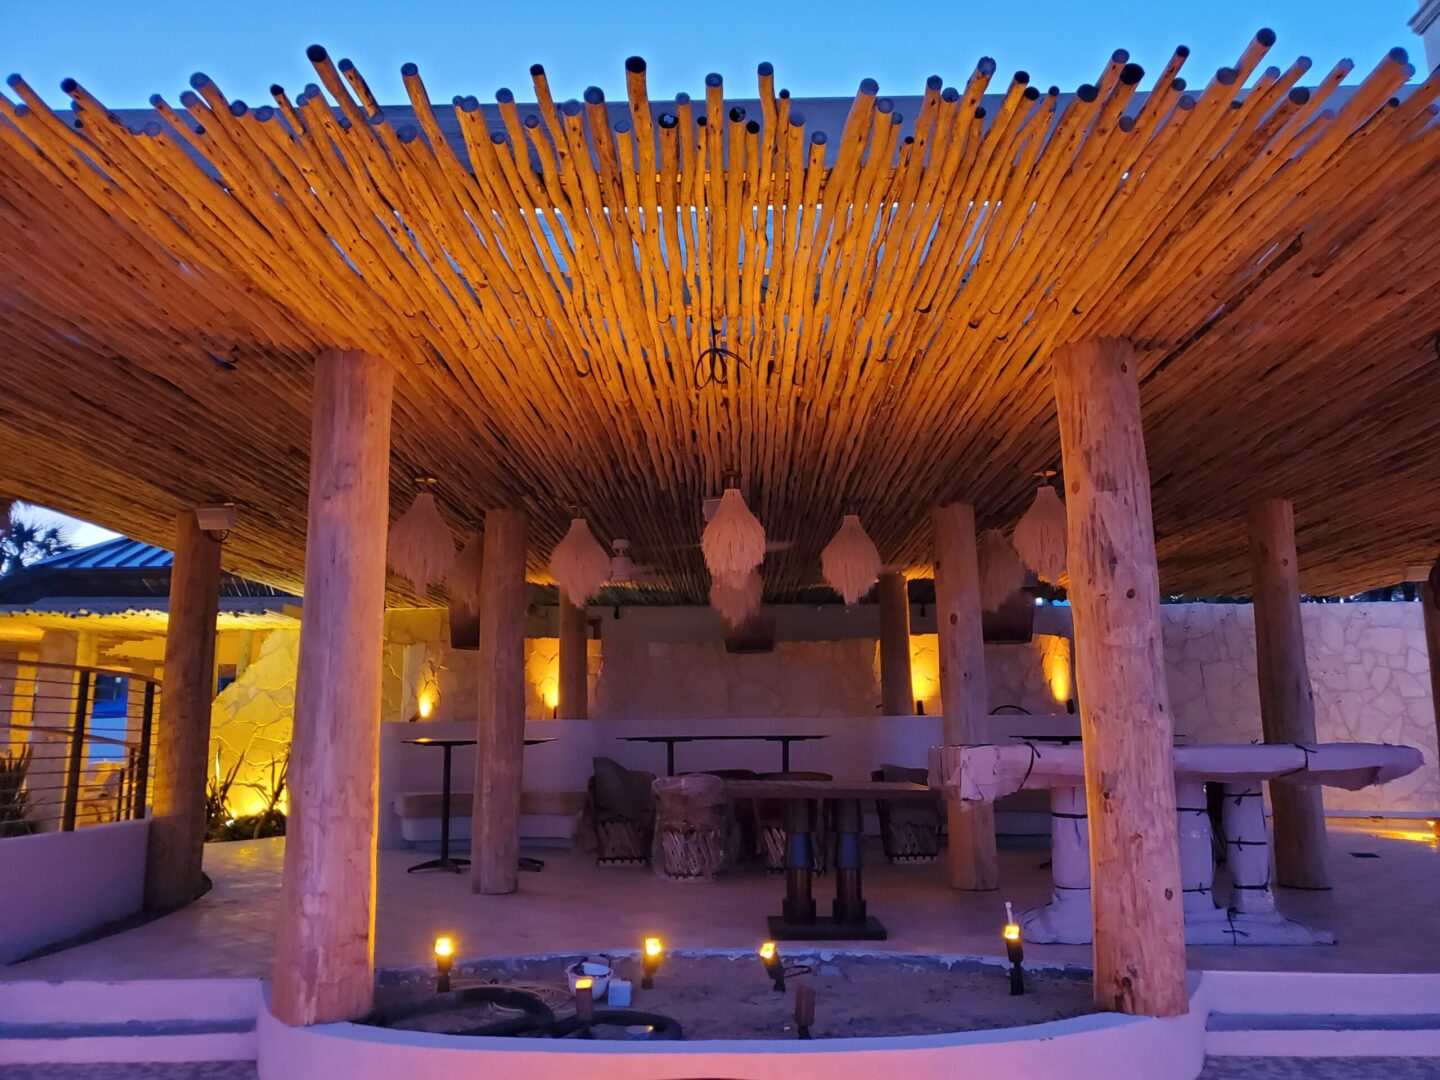 A tiki hut with candles